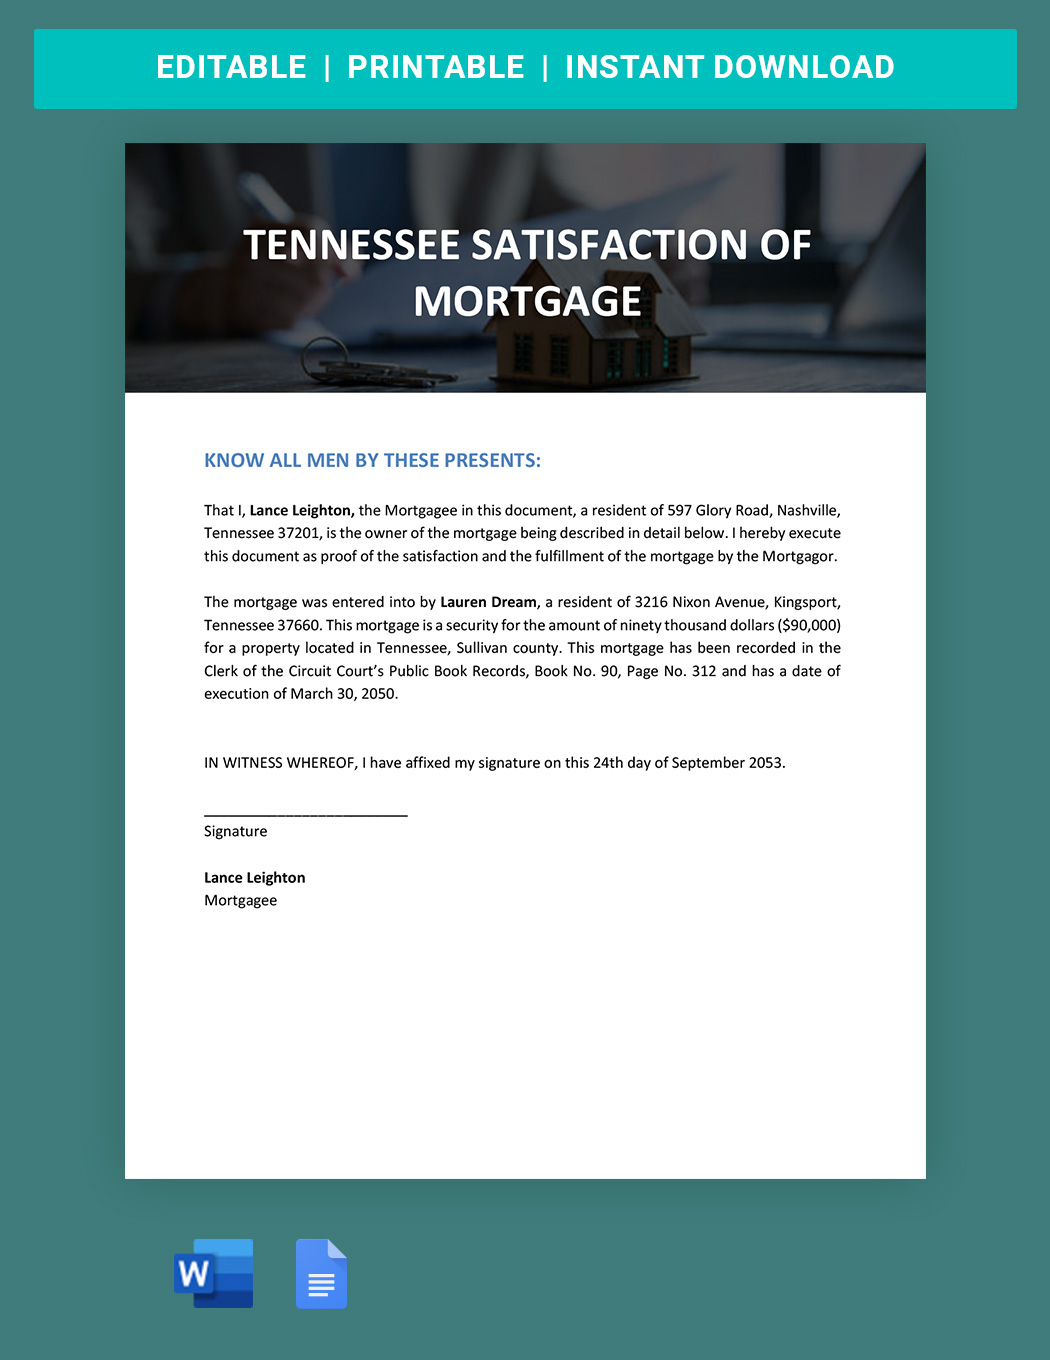 Tennessee Satisfaction of Mortgage Template